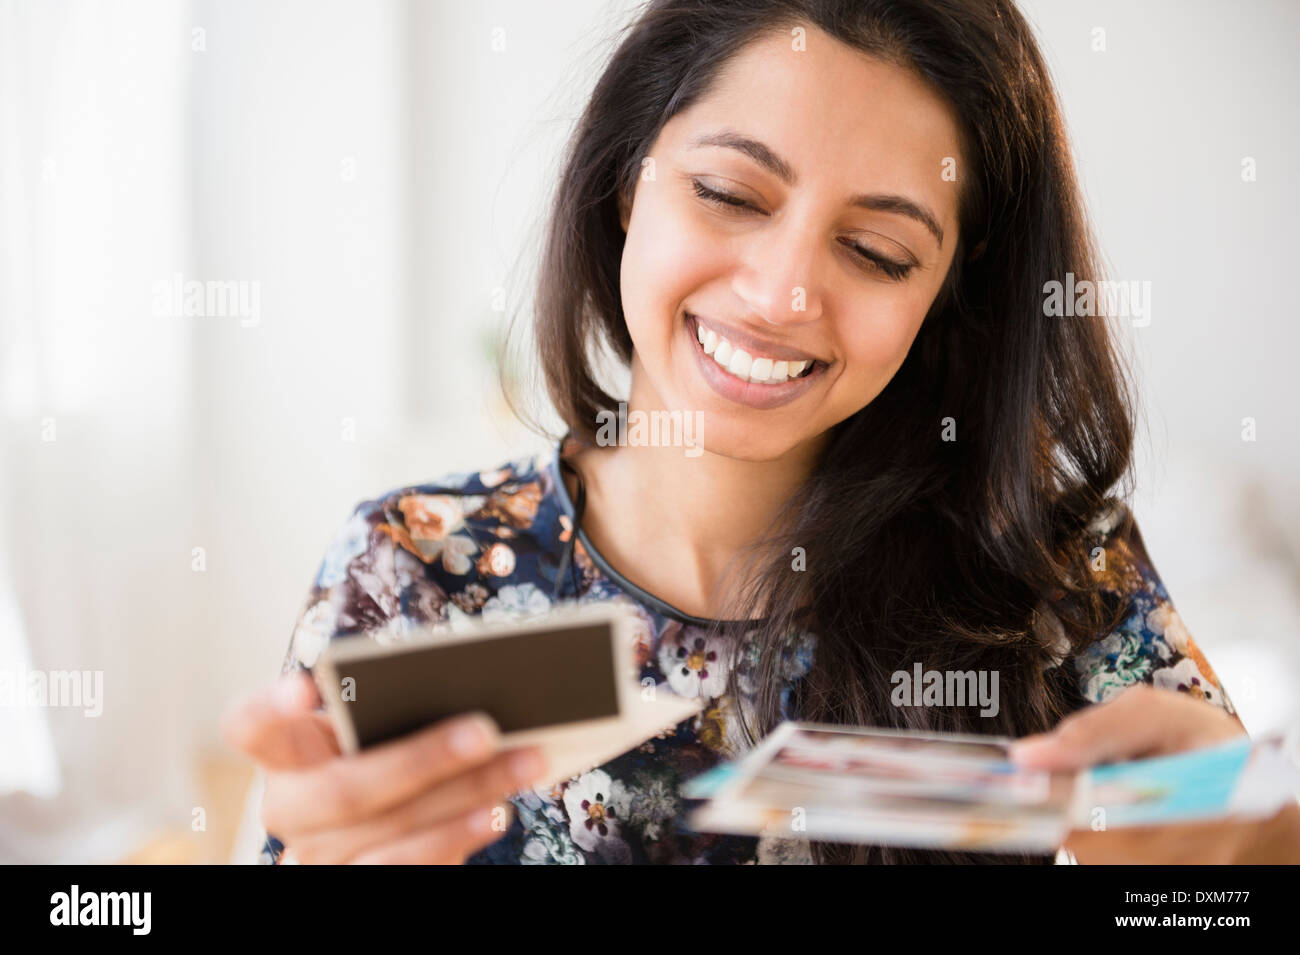 Smiling Asian woman looking at photographs Banque D'Images